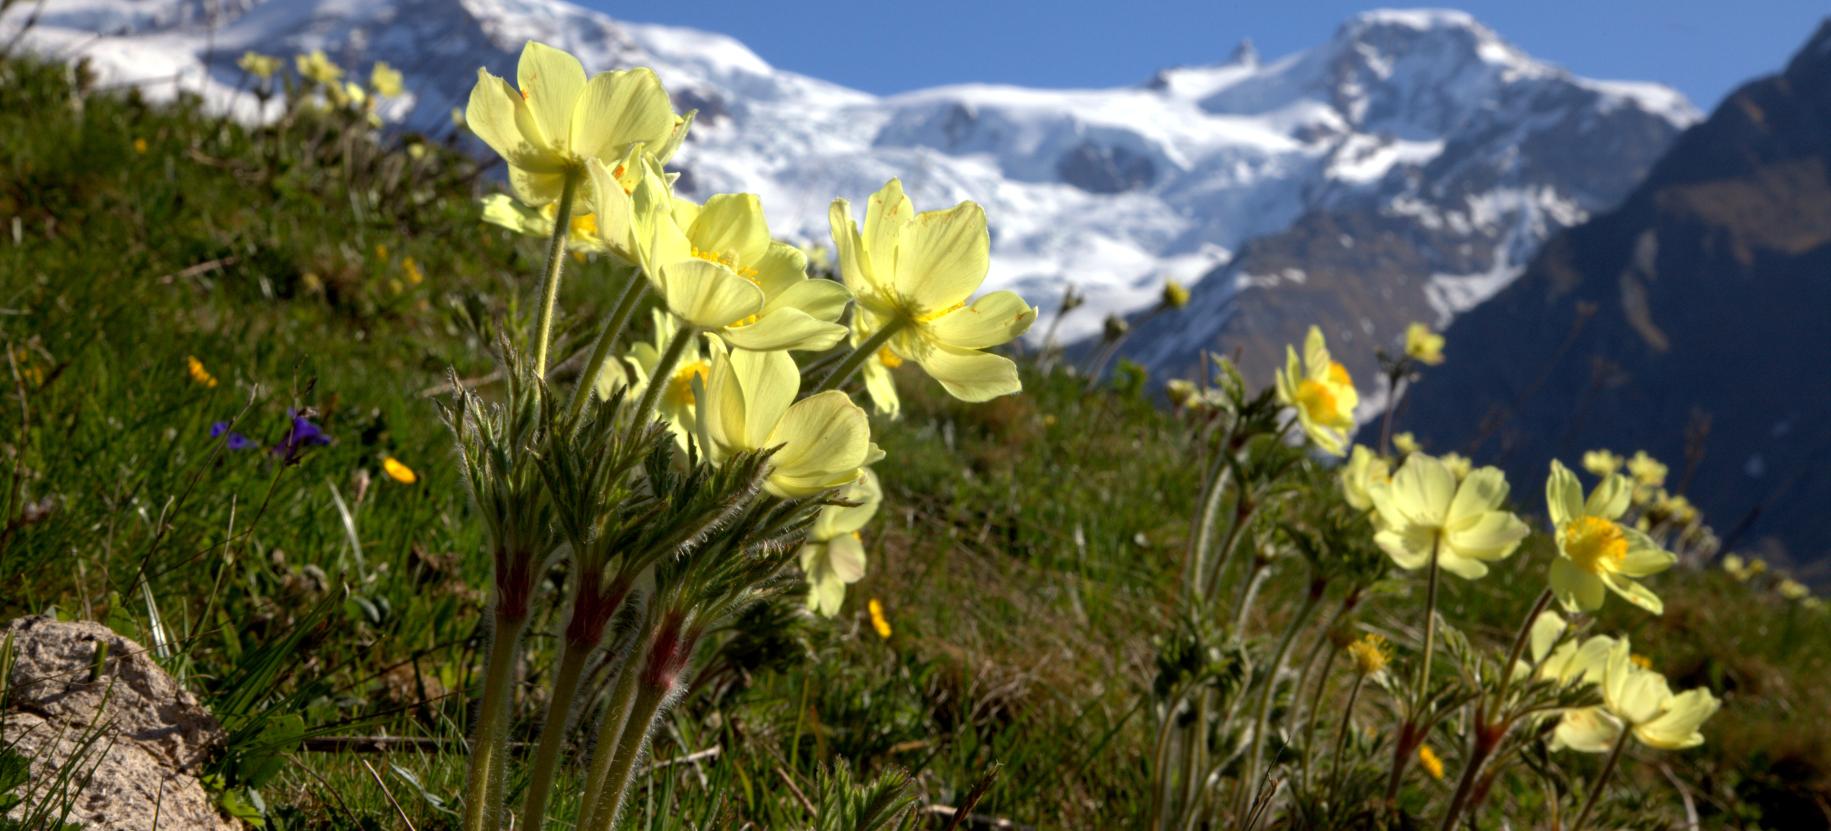 Blooms in the Gressoney Valley